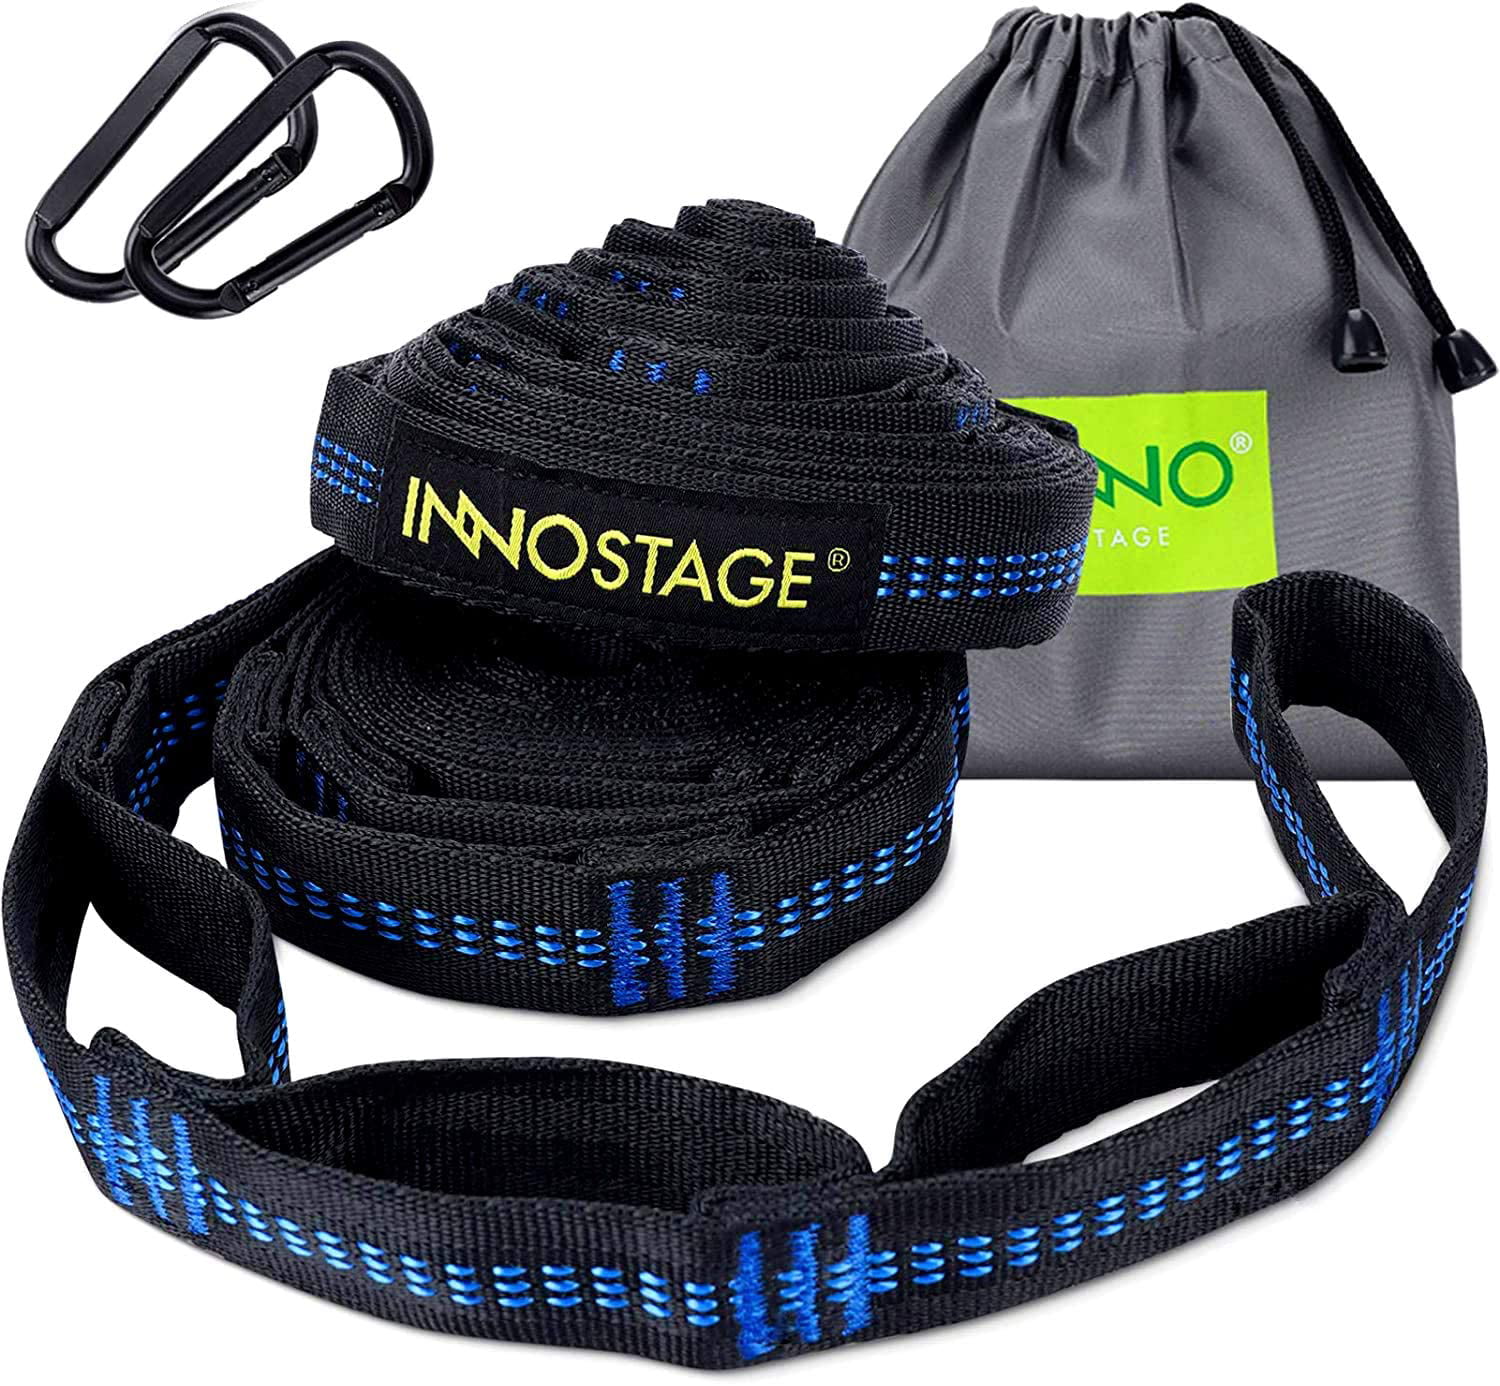 Camping Hammock Tree Straps Set with 2 Carabiners Heavy Duty Straps Adjustable 